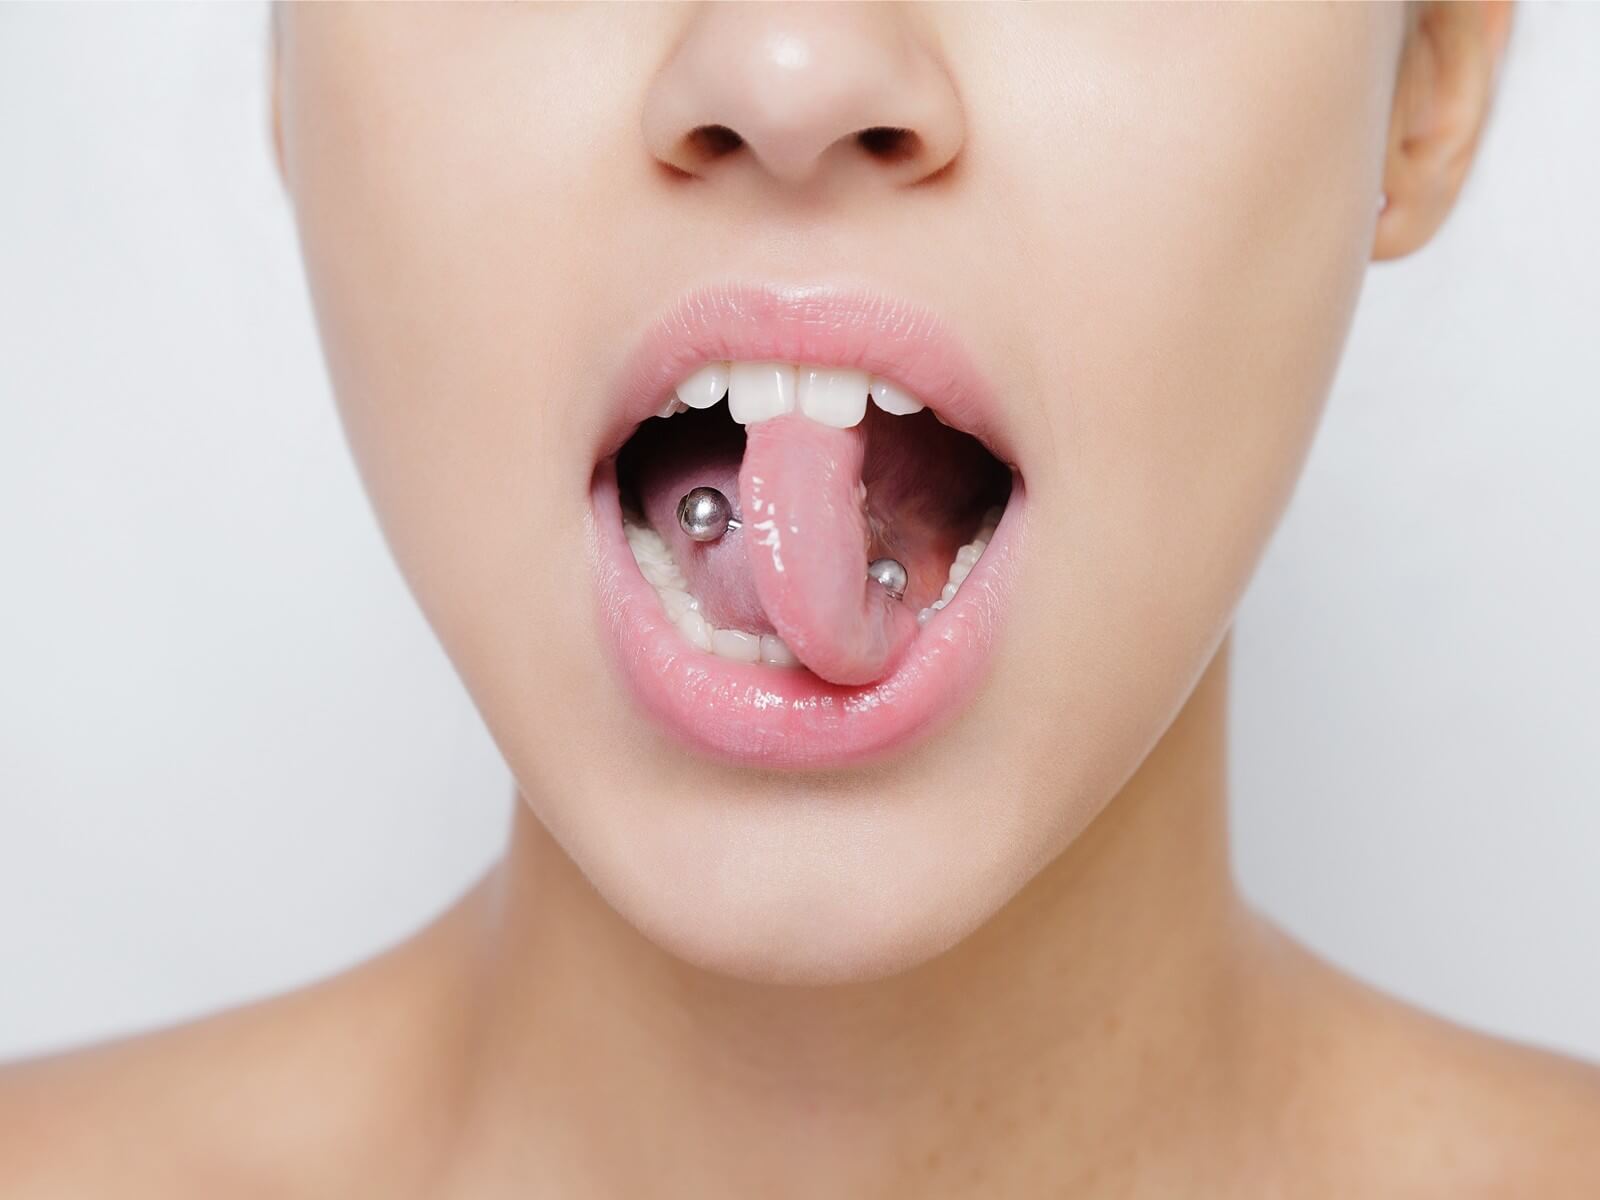 Is Oral Piercing Bad for Your Teeth?